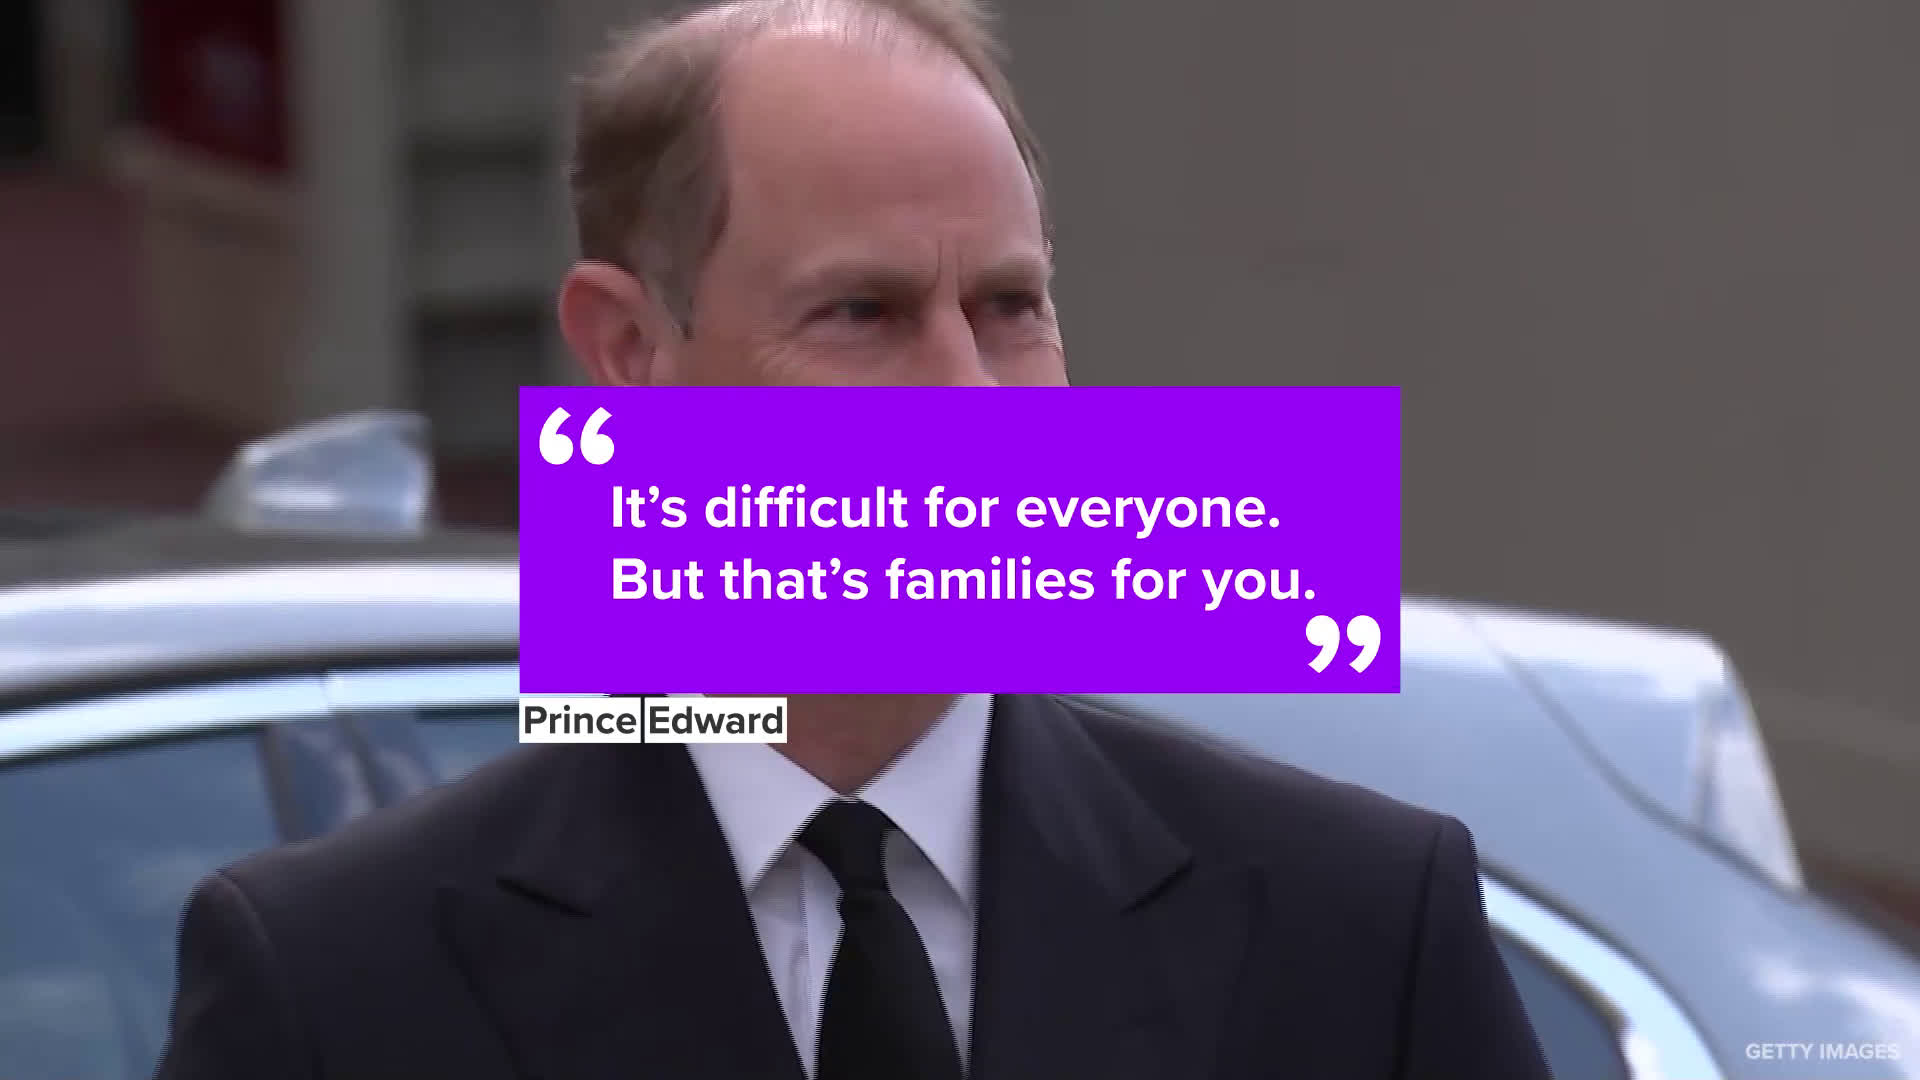 Prince Edward proves he's the royal wise uncle speaking out on Harry & Meghan